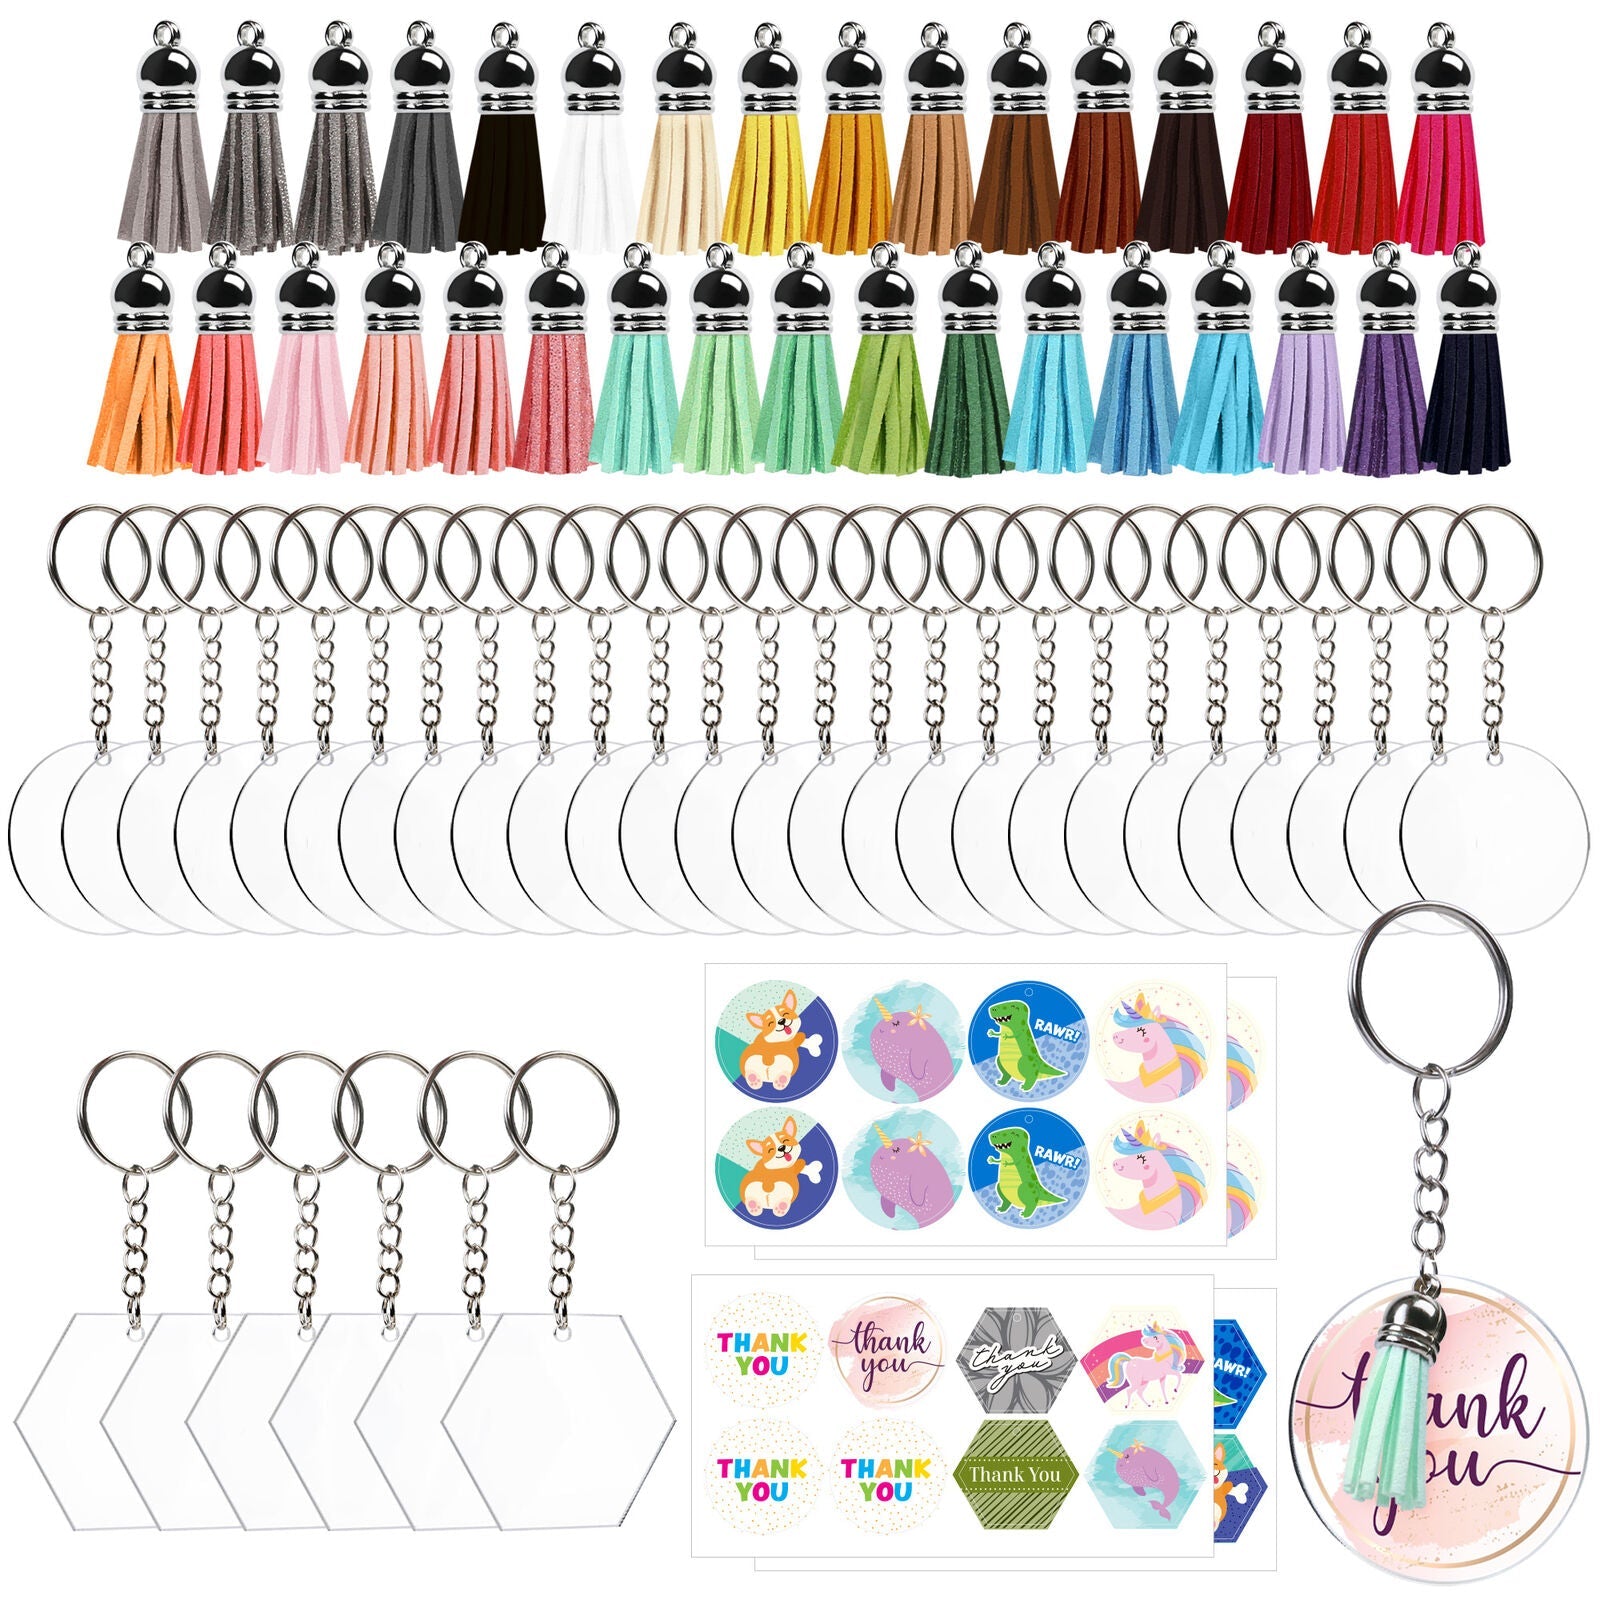 Acrylic Ornament Blanks Kit With Discs, Circles, And Colorful Tassels  90/Blank Acrylic Keychains Rings For Jumping And Dropship From  Yangchenwang, $9.43